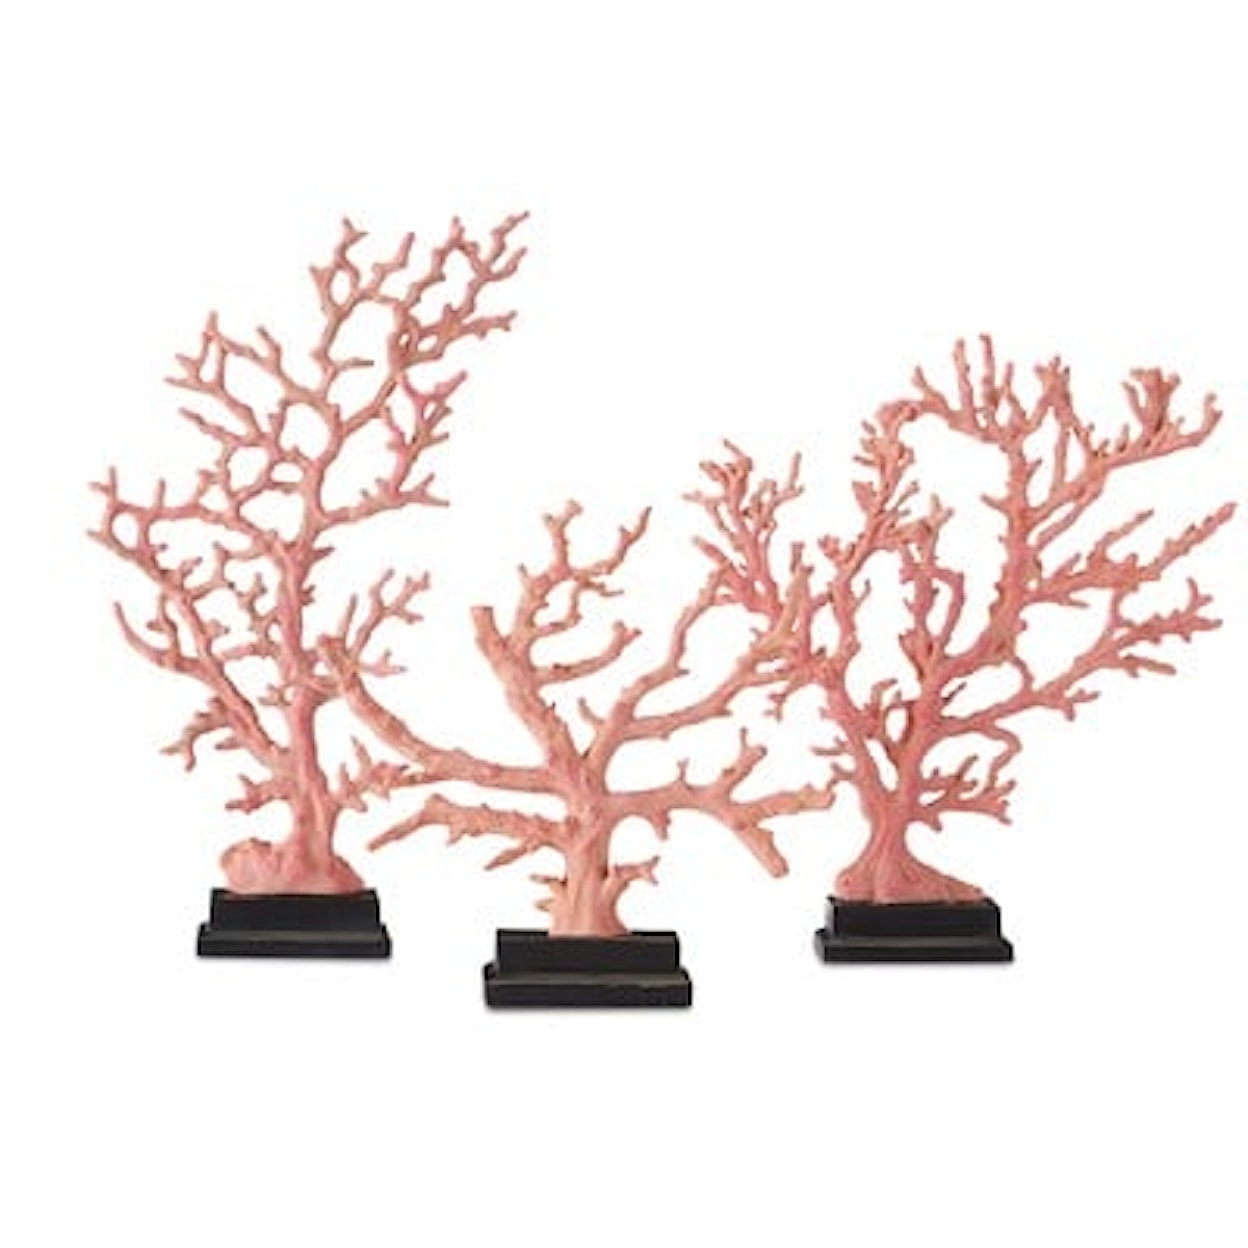 Currey & Co Red Coral Large Red Coral Branches Set of 3